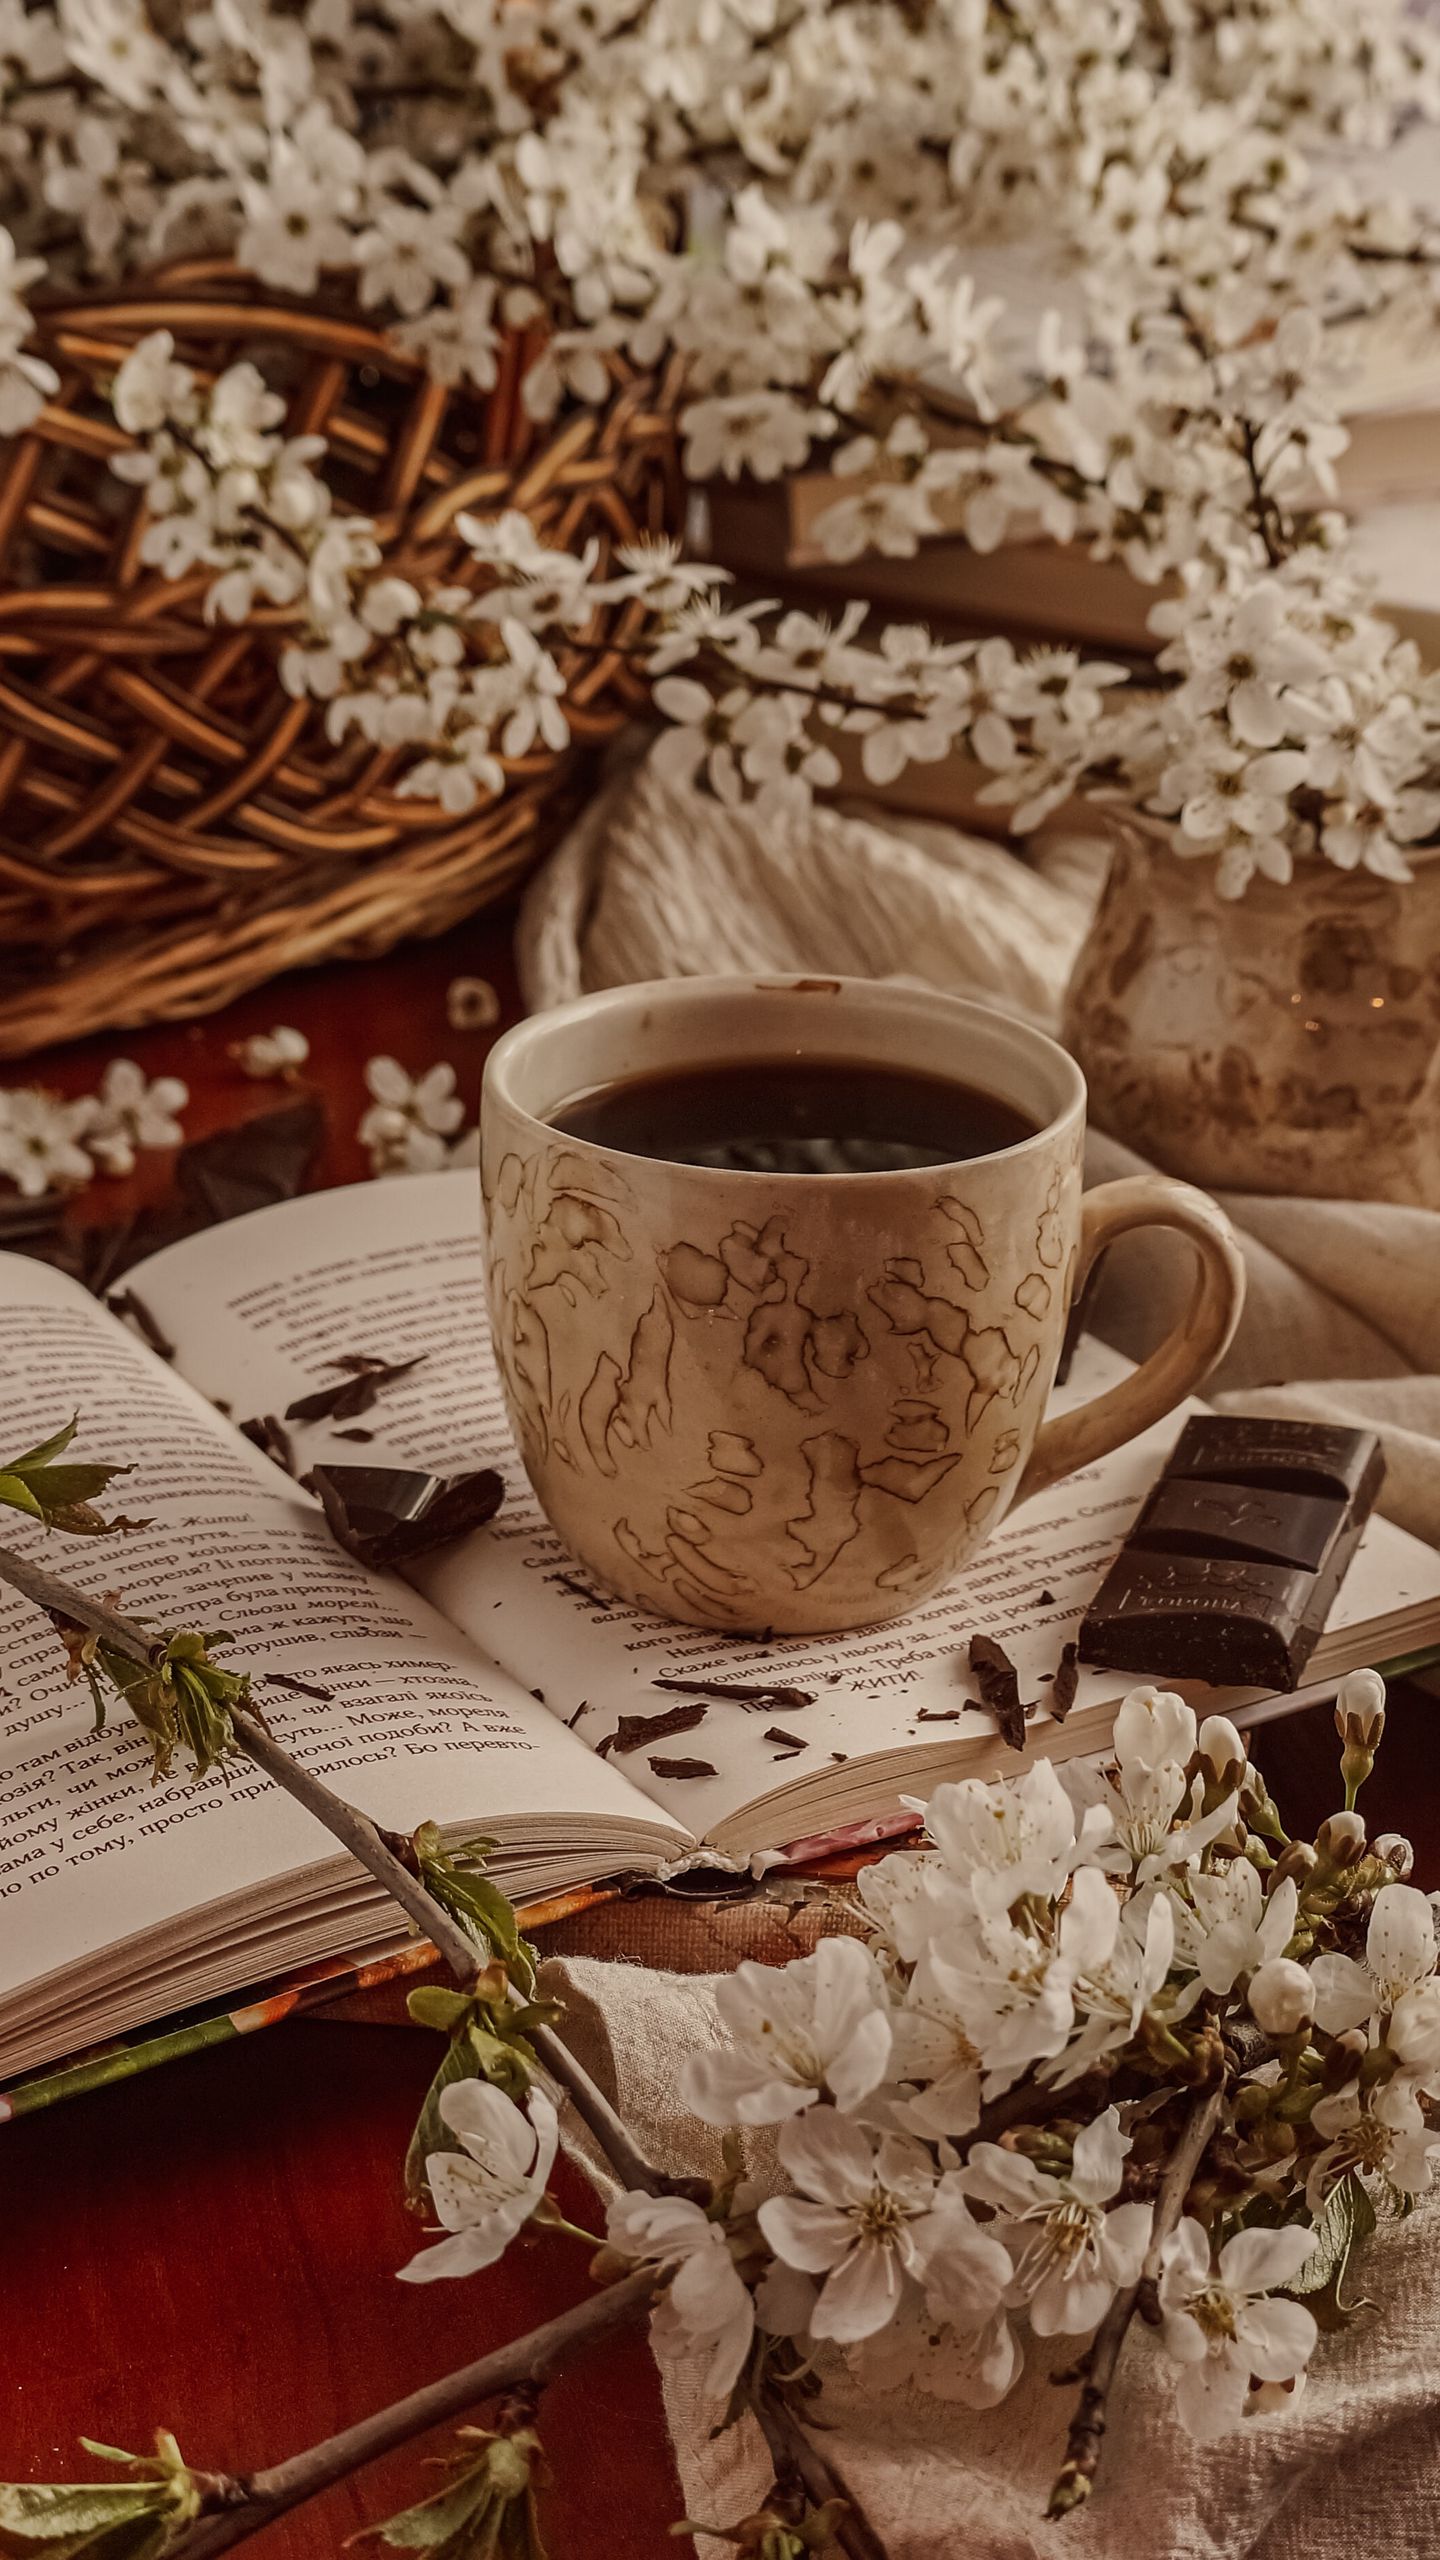 Download wallpaper 1440x2560 cup, tea, chocolate, book, flowers qhd samsung  galaxy s6, s7, edge, note, lg g4 hd background